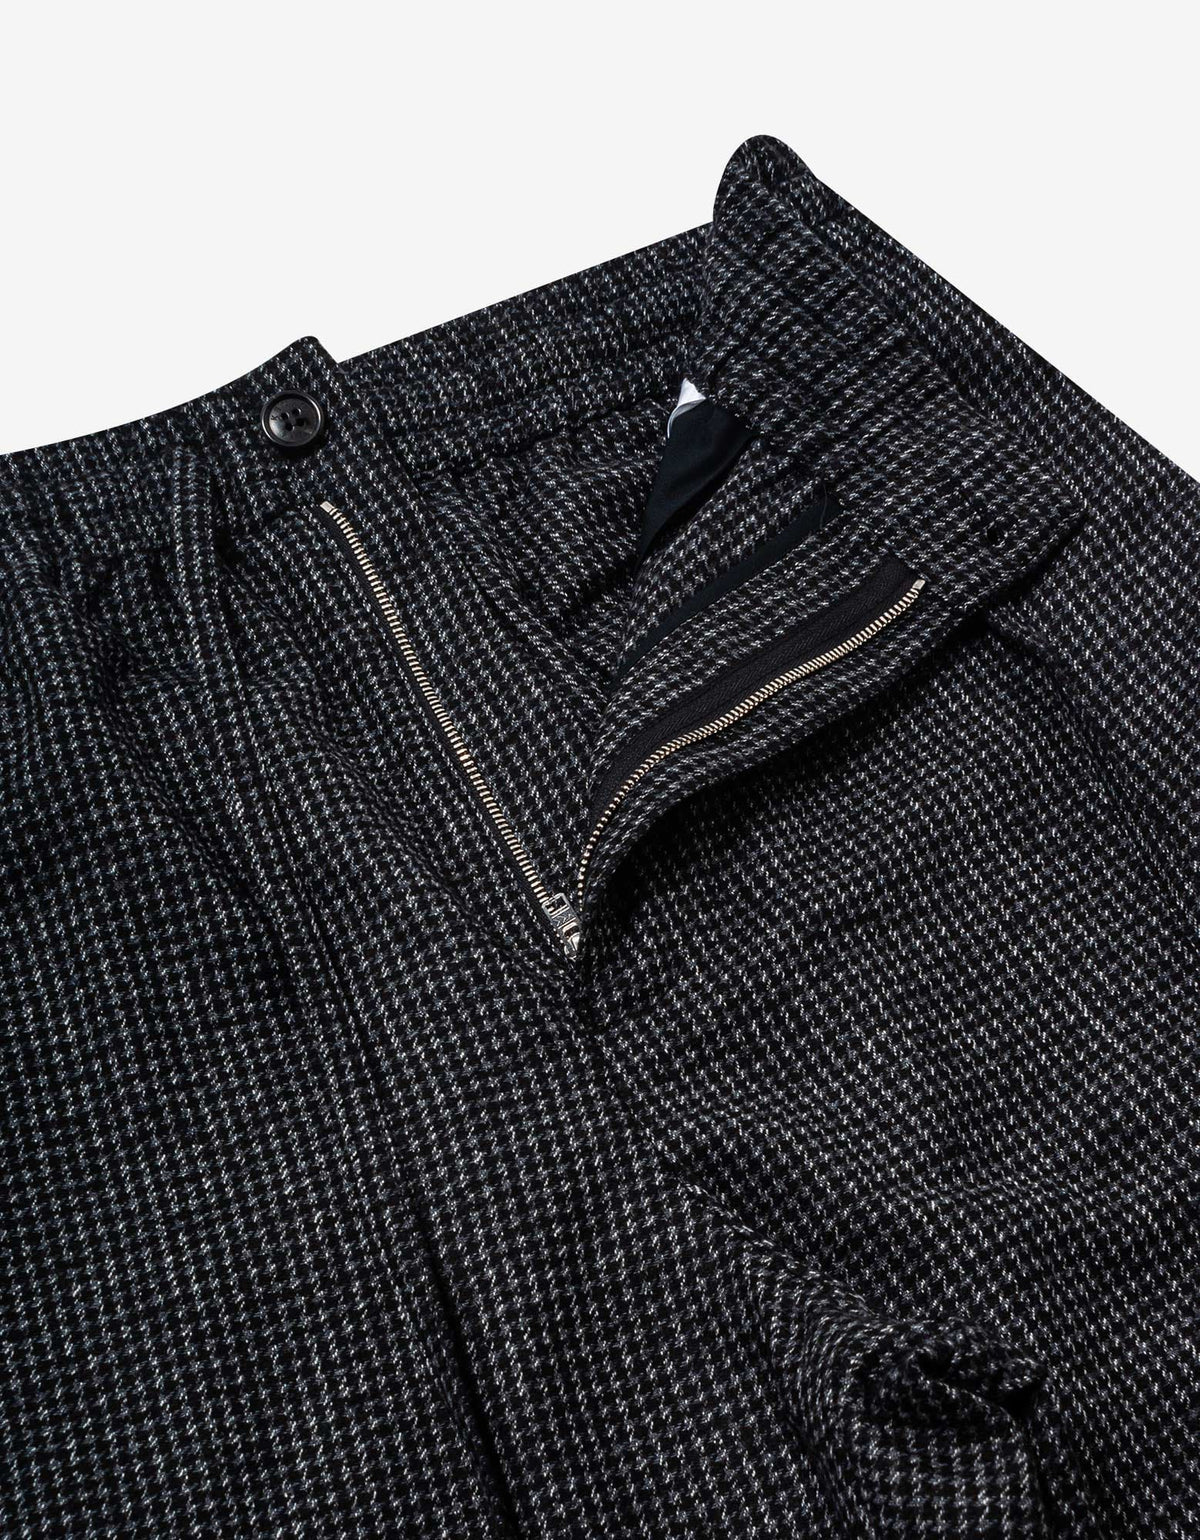 Kenzo Grey Checked Wool Cargo Trousers